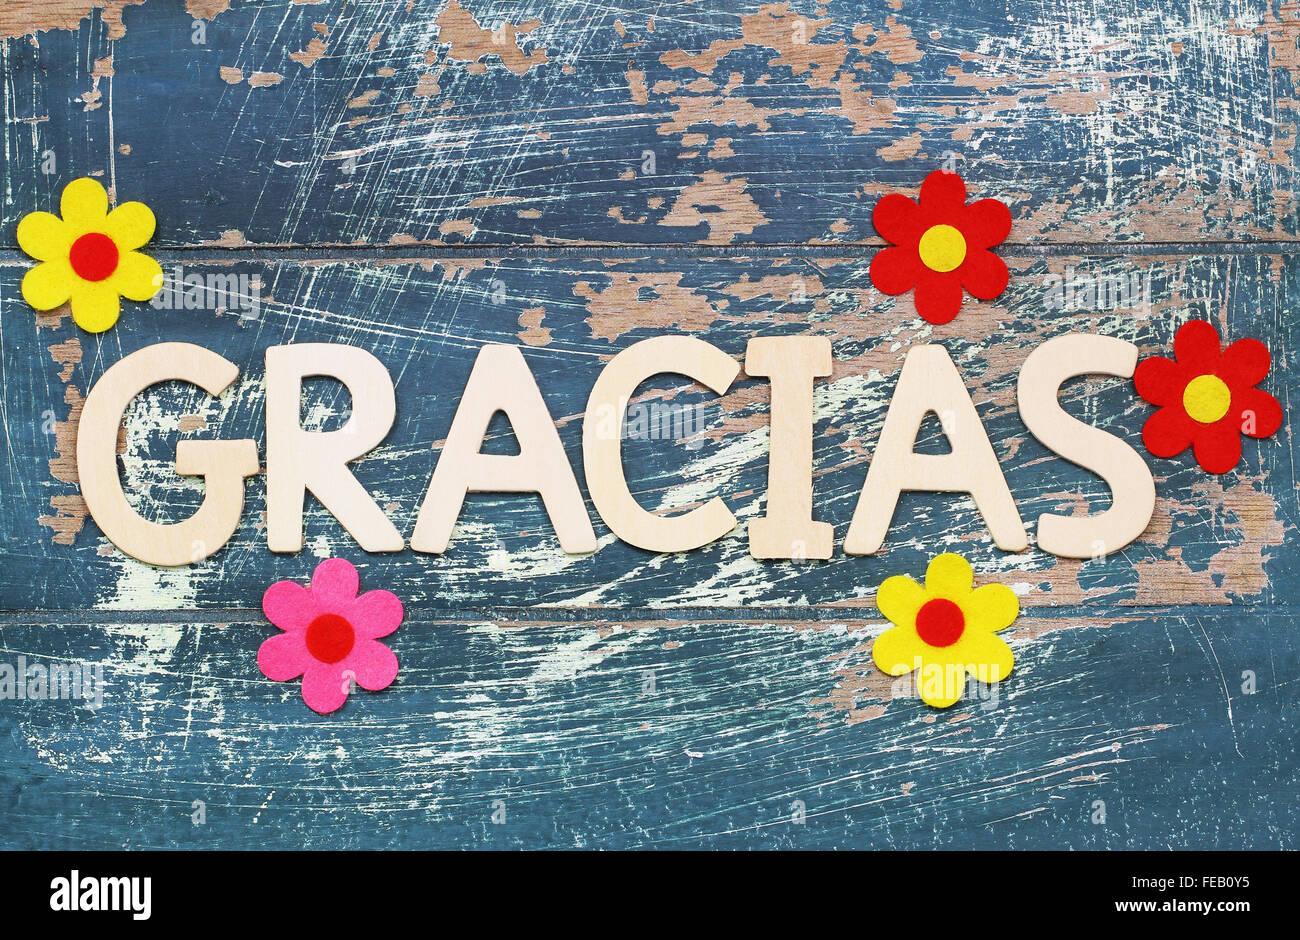 Gracias Thank You In Spanish Written With Wooden Letters On Rustic Surface And Colorful Flowers Stock Photo Alamy